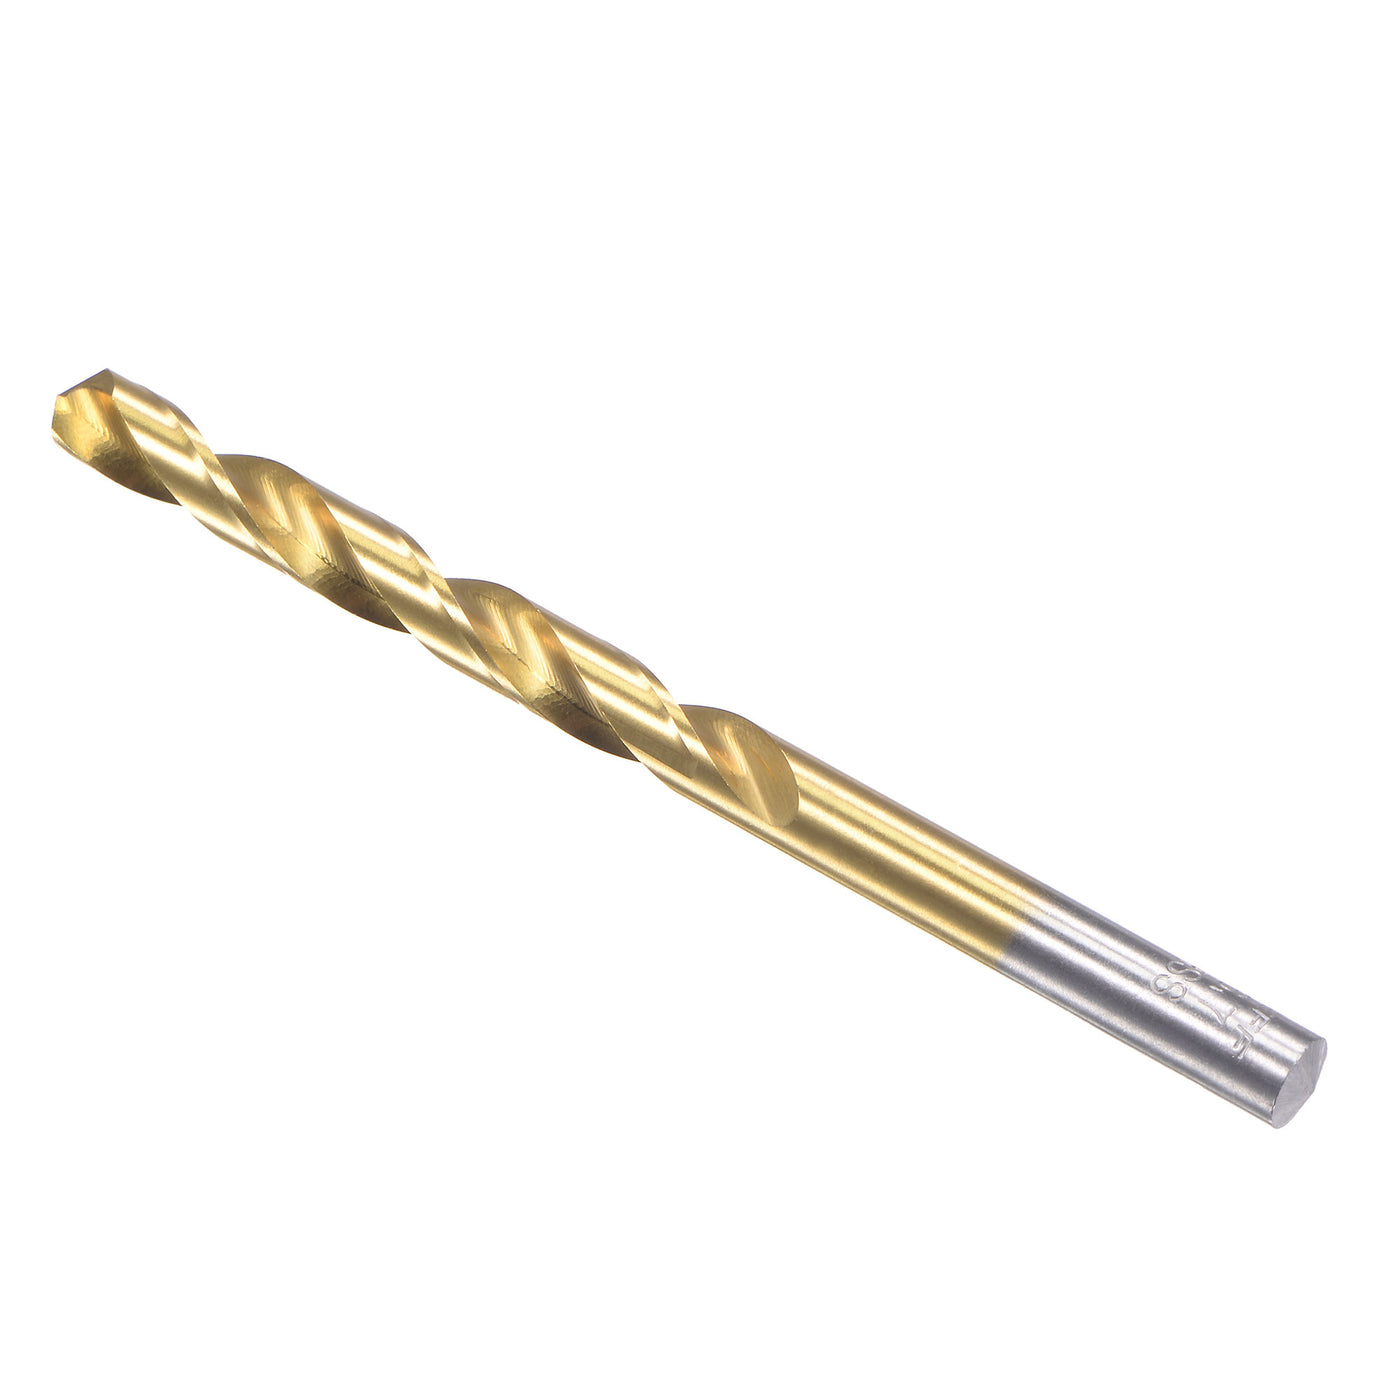 uxcell Uxcell High Speed Steel Twist Drill Bit 6.7mm Fully Ground Titanium Coated 2 Pcs